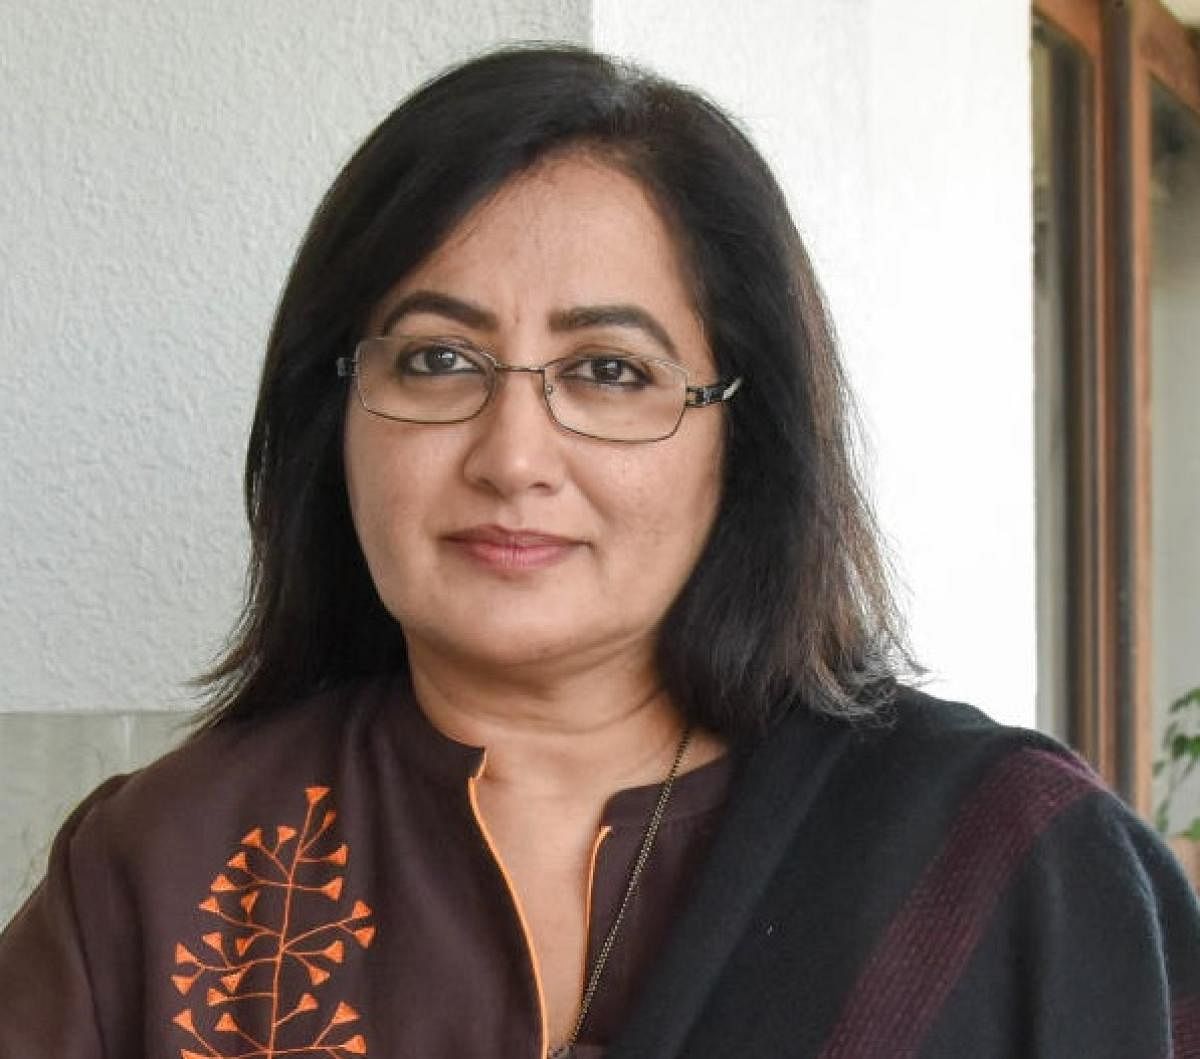 The supporters of Independent candidate A Sumalatha Ambareesh have expressed displeasure against the election officer and alleged a conspiracy in allotting the serial number ‘01’ to JD(S) candidate K Nikhil and the number '20' to Sumalatha. File photo